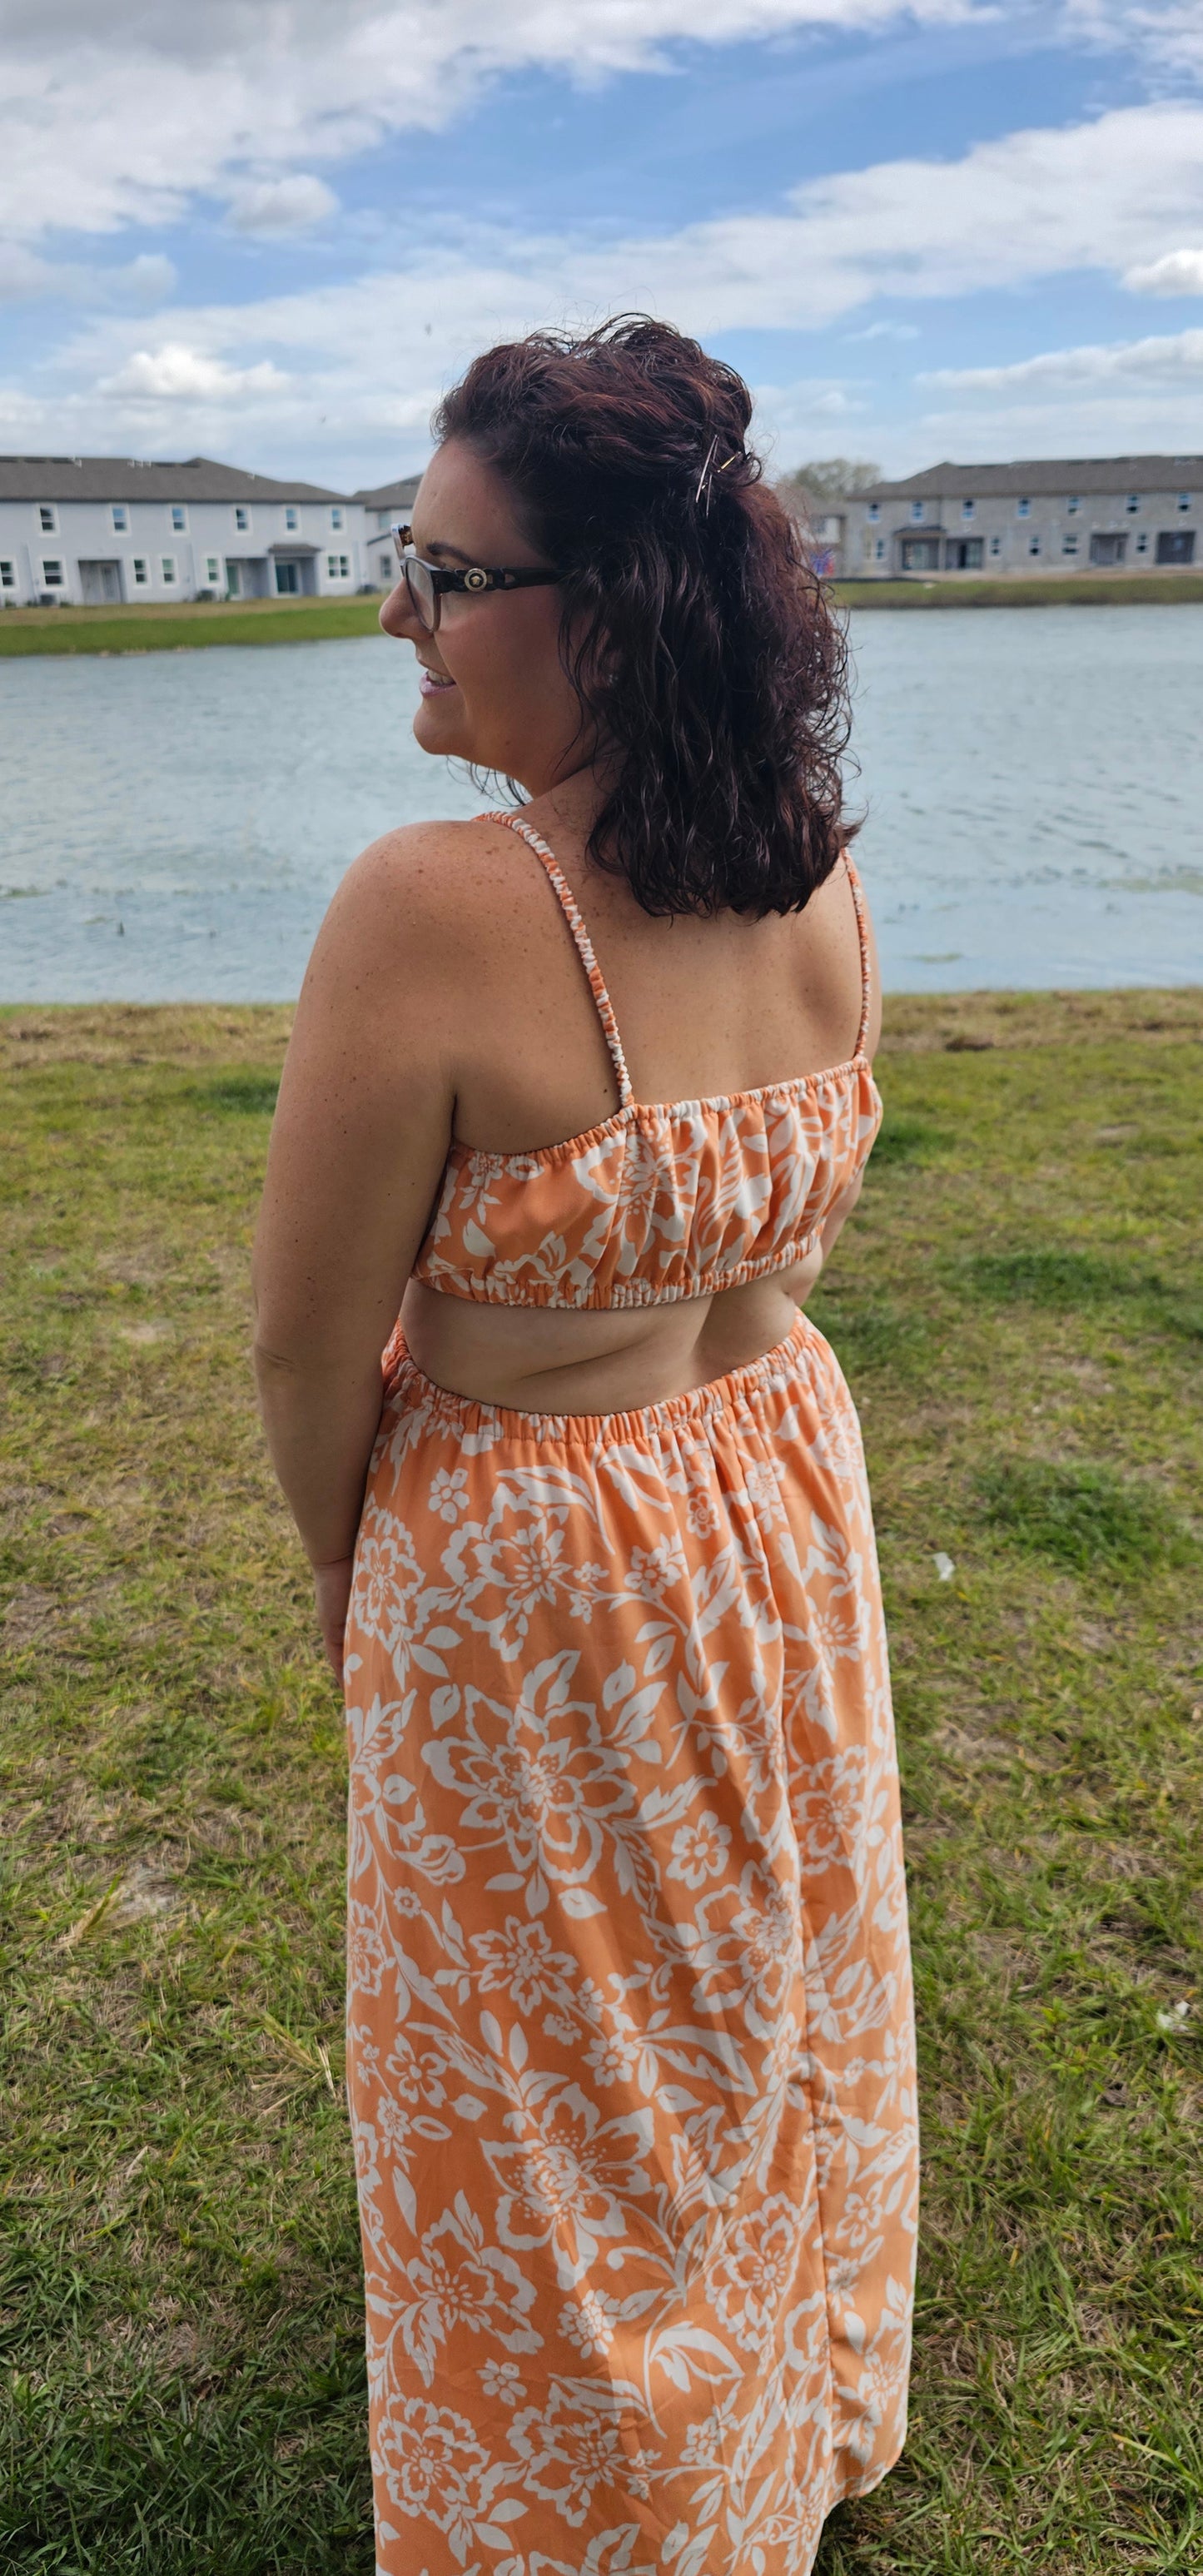 Greet the sunshine in style with the "Out For Lunch" maxi dress. It's got all the features you need for a lunchtime jaunt: square neckline, ruched spaghetti straps, and fun side and back cut-out details. Plus, it's made from lightweight and comfortable materials so you can explore a new lunch spot with ease! Let's get brunchin'! Sizes small through large.